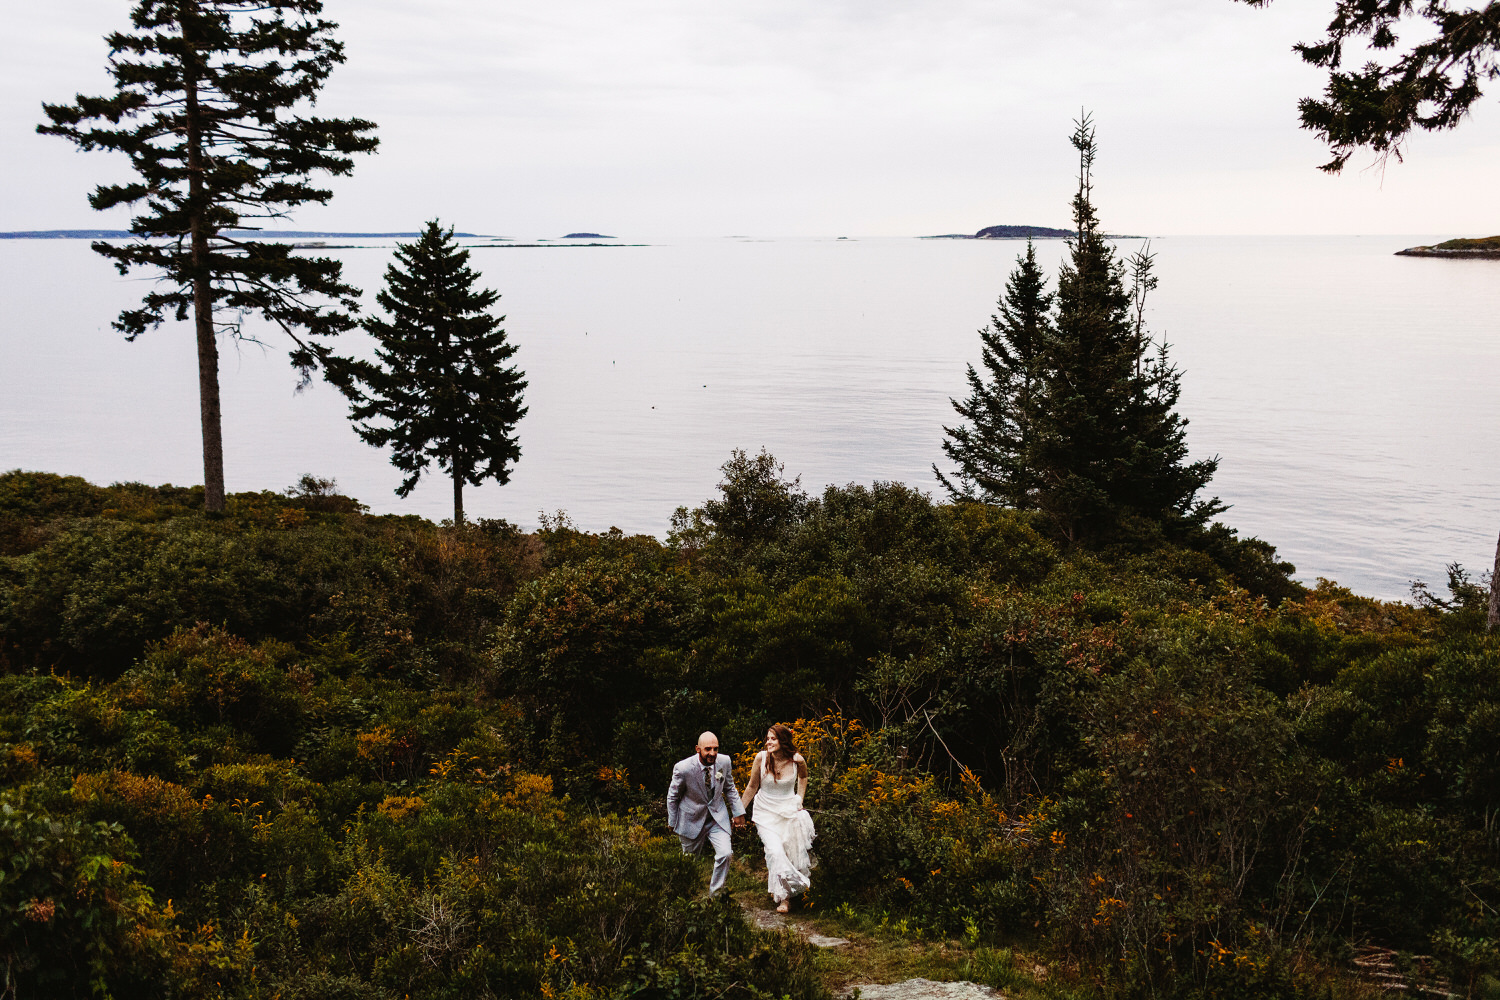 Bride and groom walking together with ocean in the background